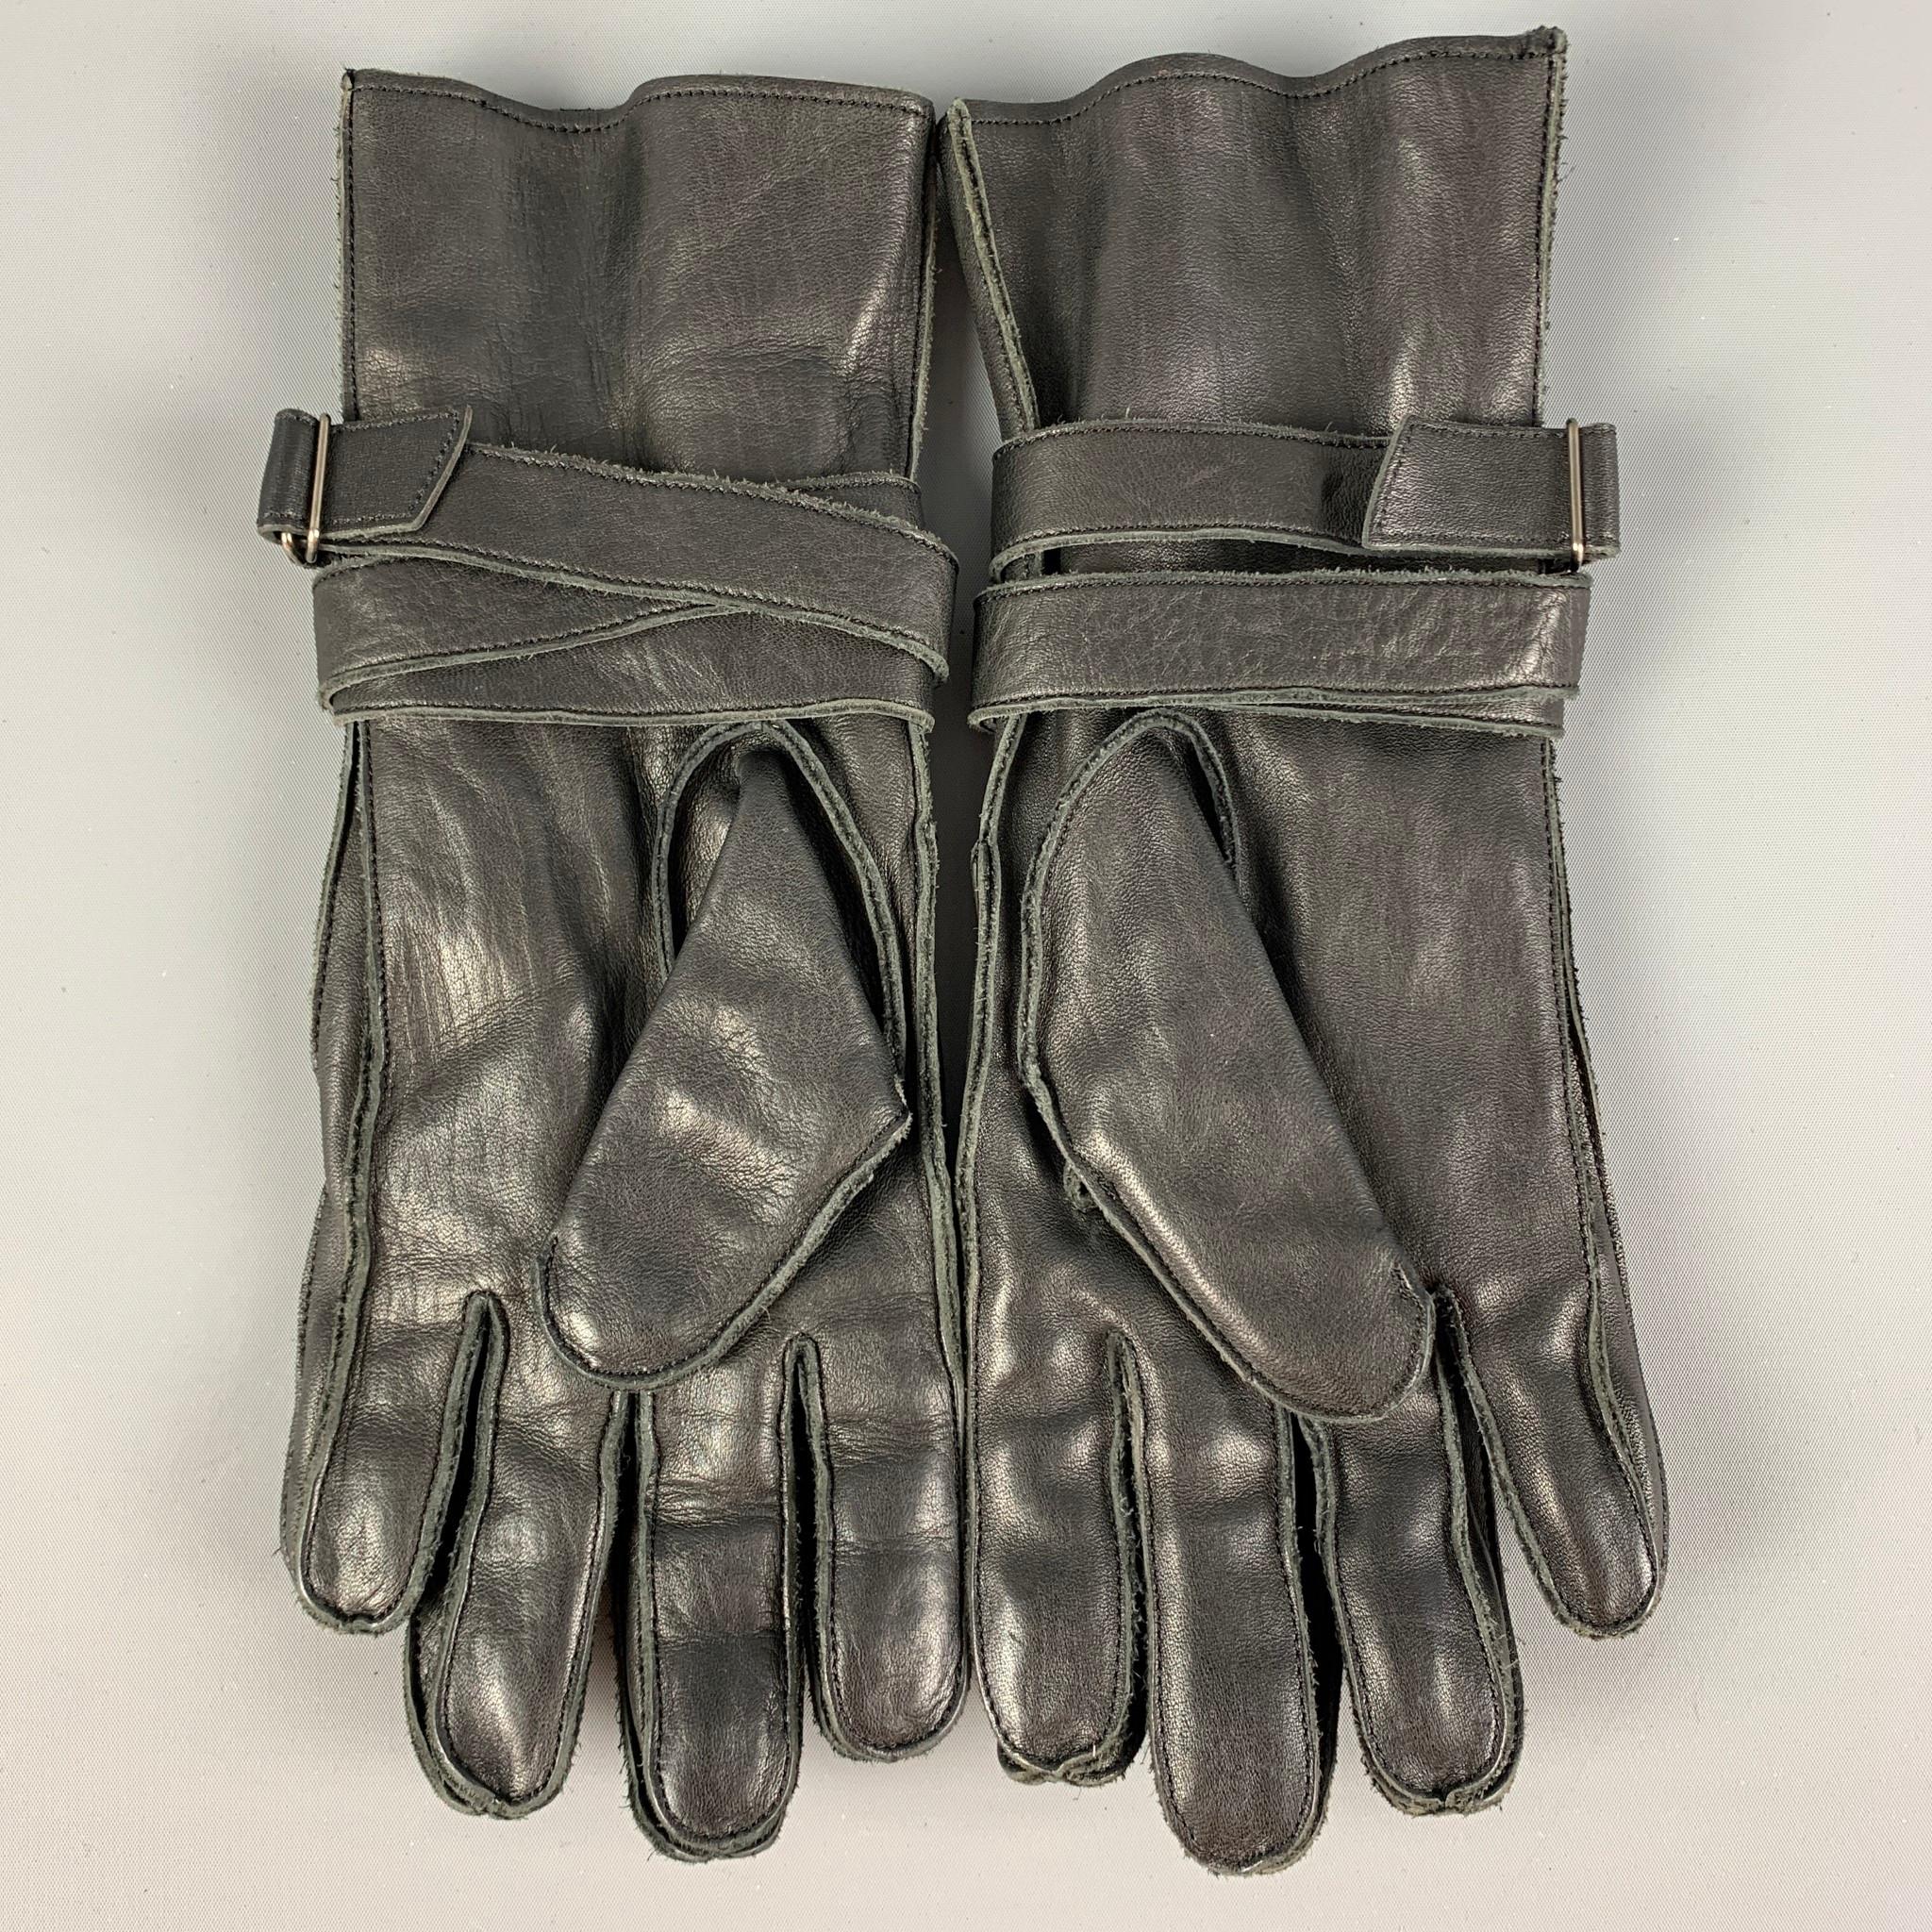 Vintage Y'S by YOHJI YAMAMOTO gloves comes in a black leather featuring a strap buckle closure. 

Very Good Pre-Owned Condition.
Marked: Size tag removed

Measurements:

Height: 12 in.
Length: 4.5 in.